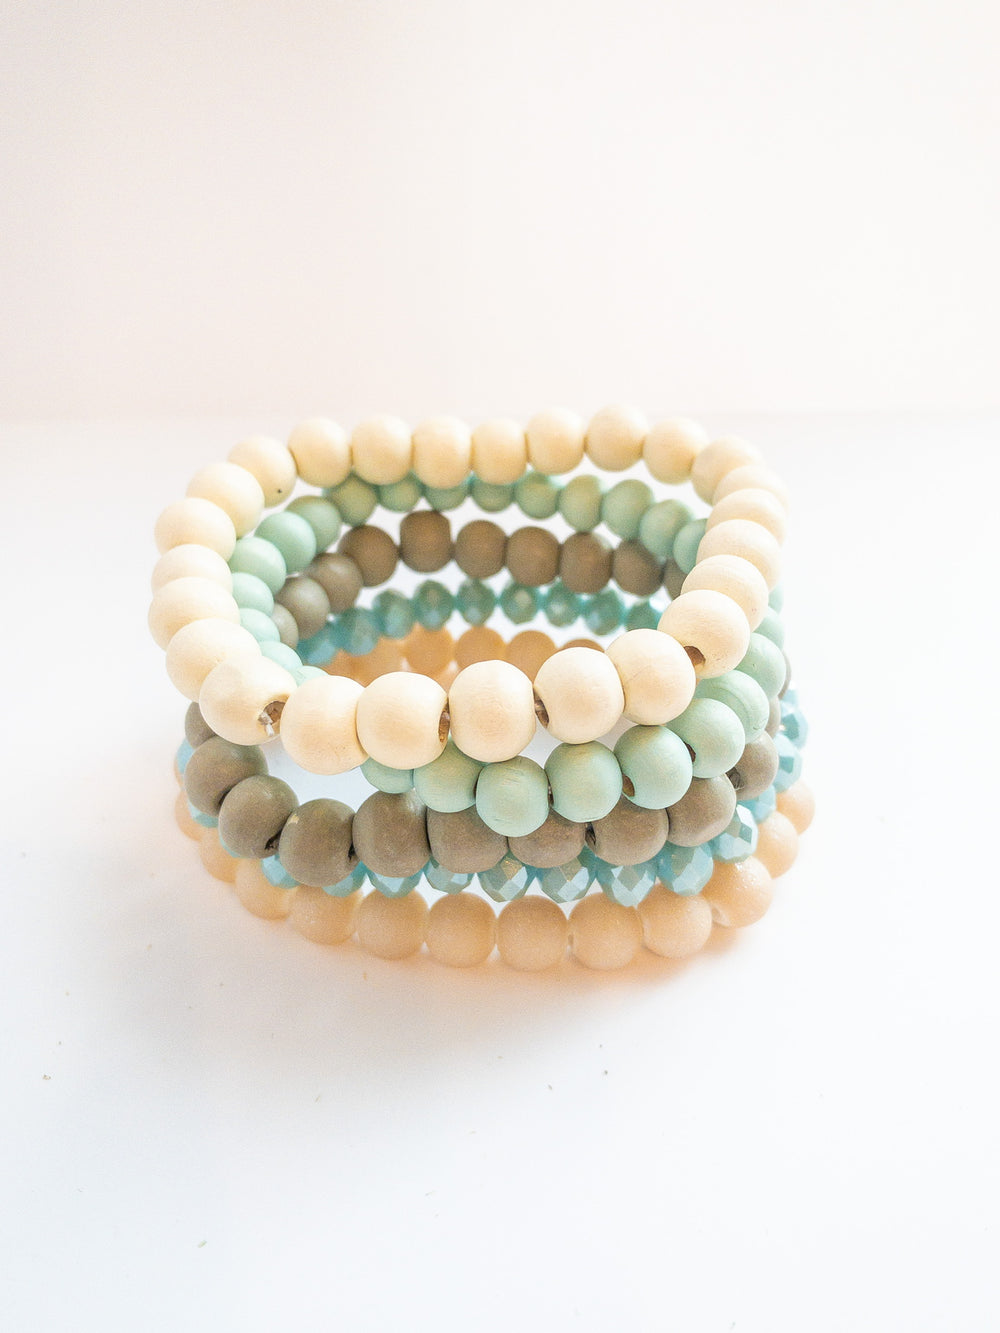 Summer 5 Layered Bracelet. Multi-colored beads. 